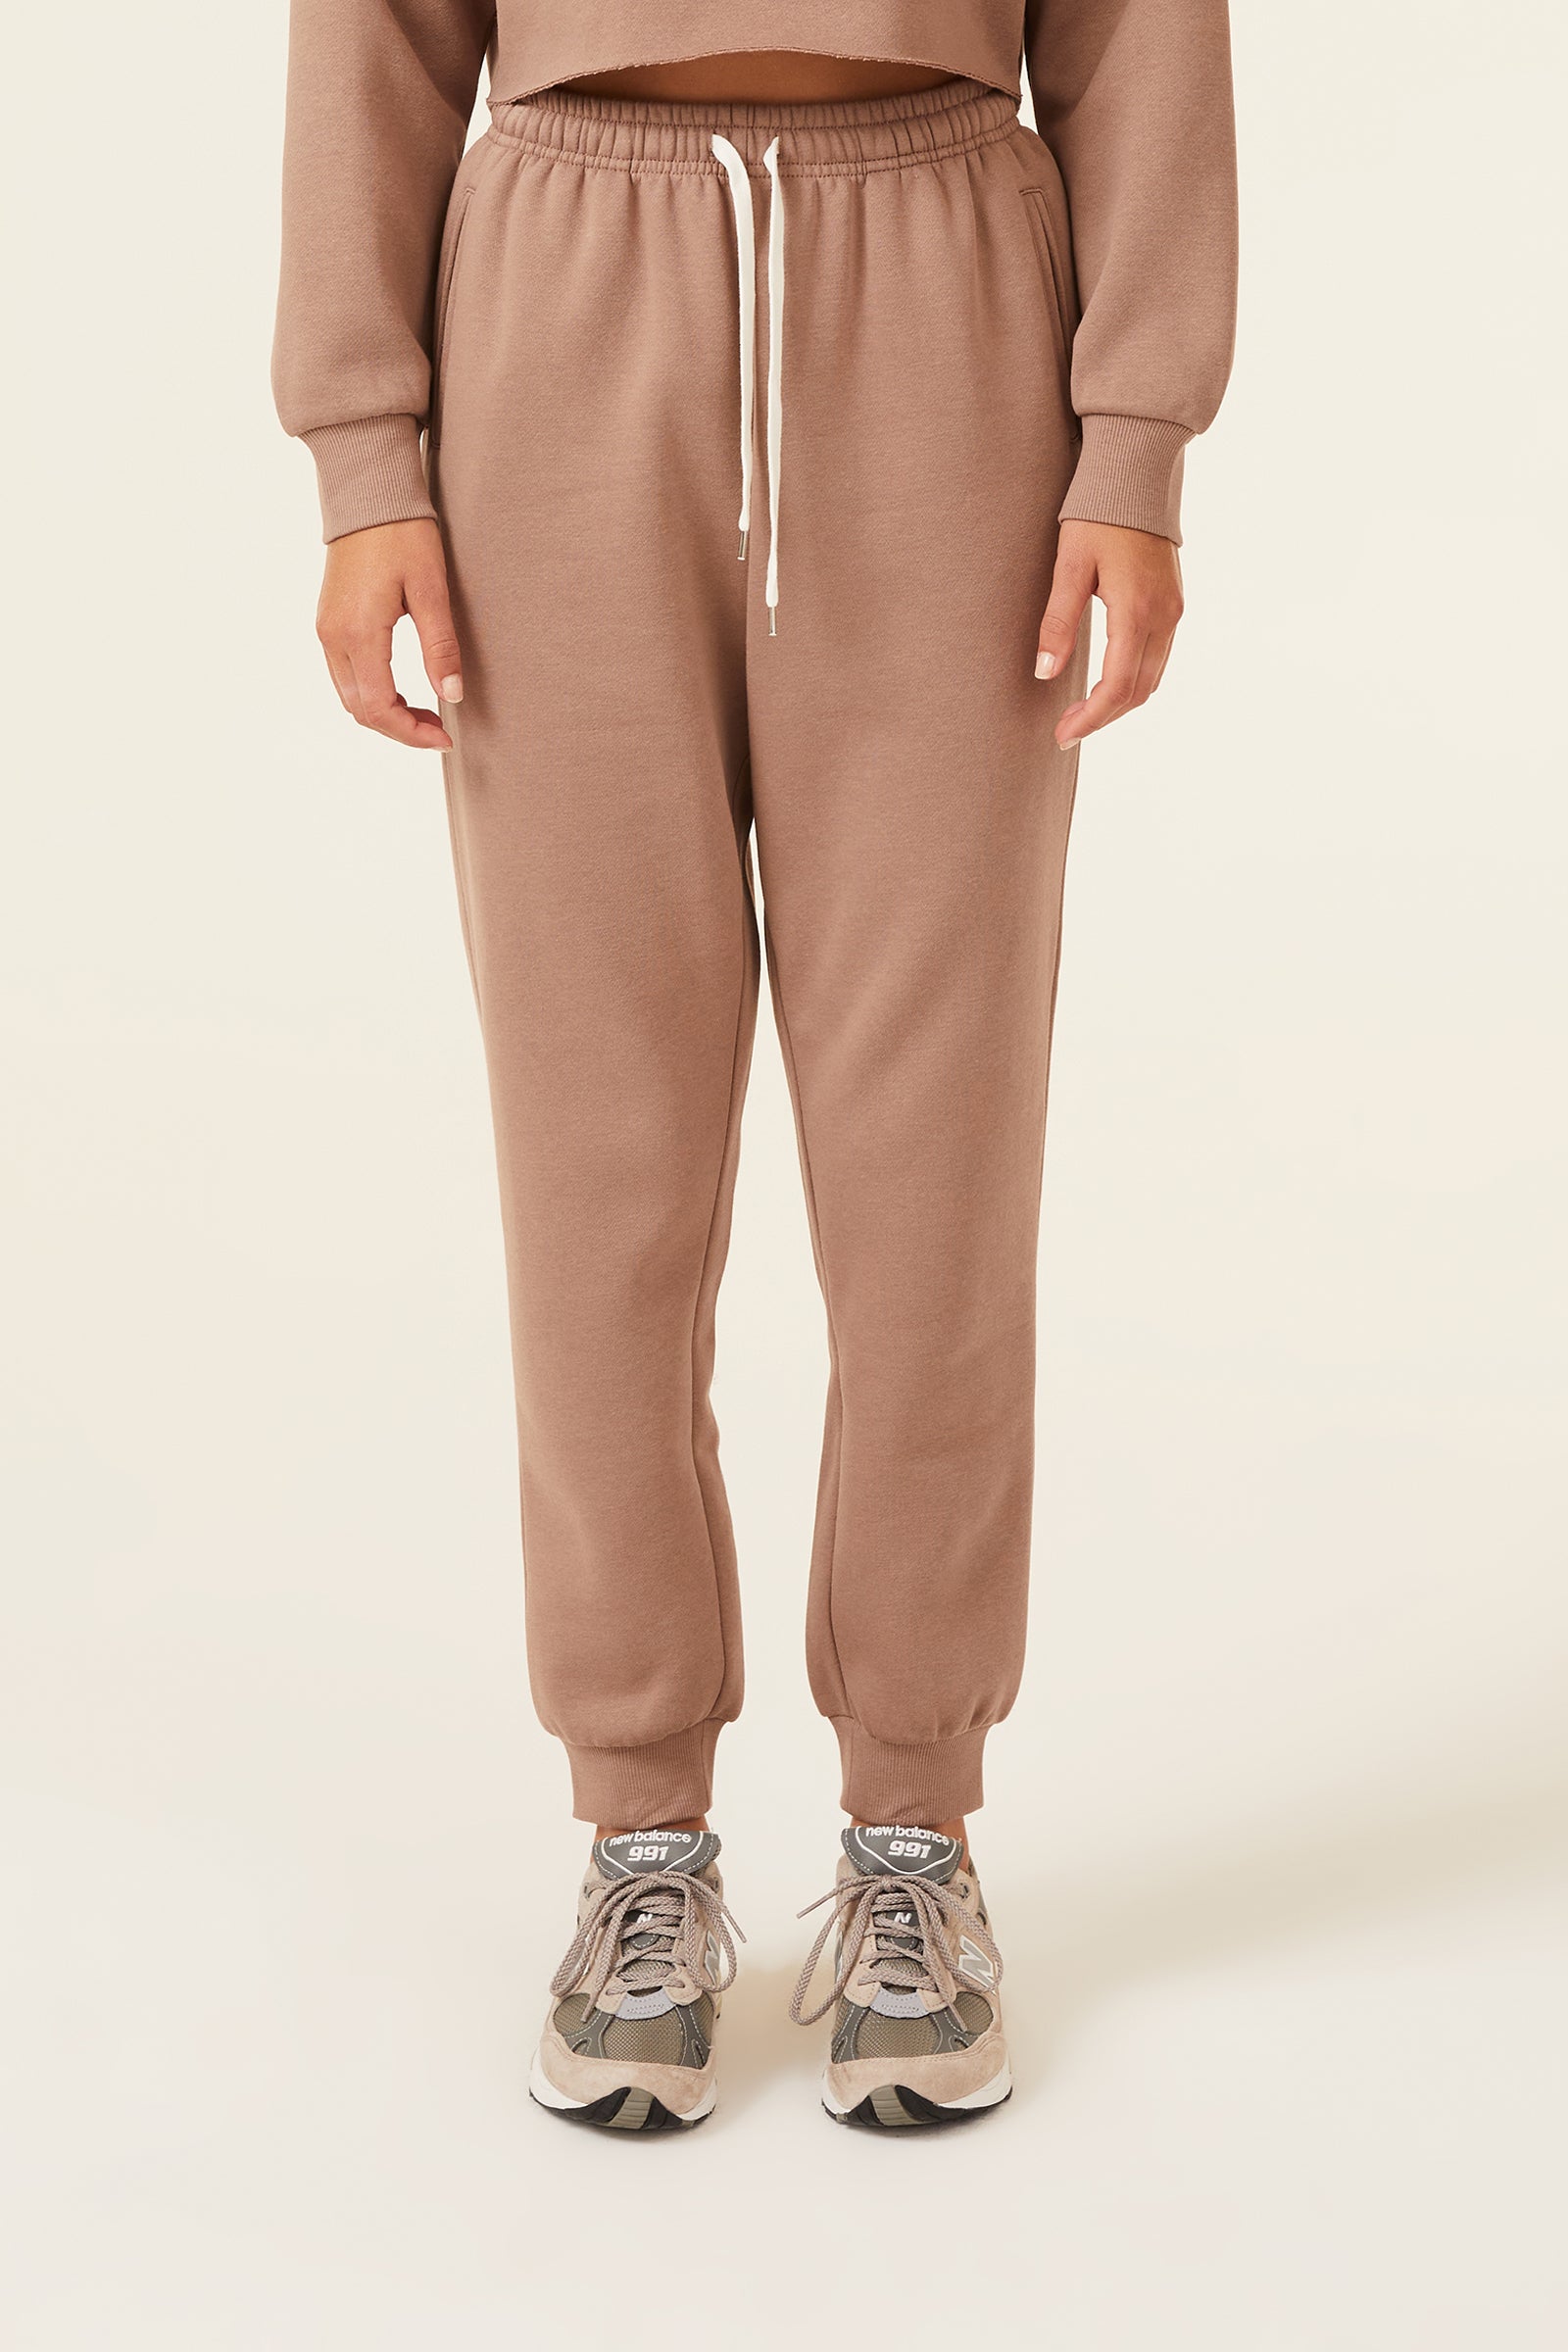 Nude Lucy Carter Classic Trackpant in a Brown Carob Colour